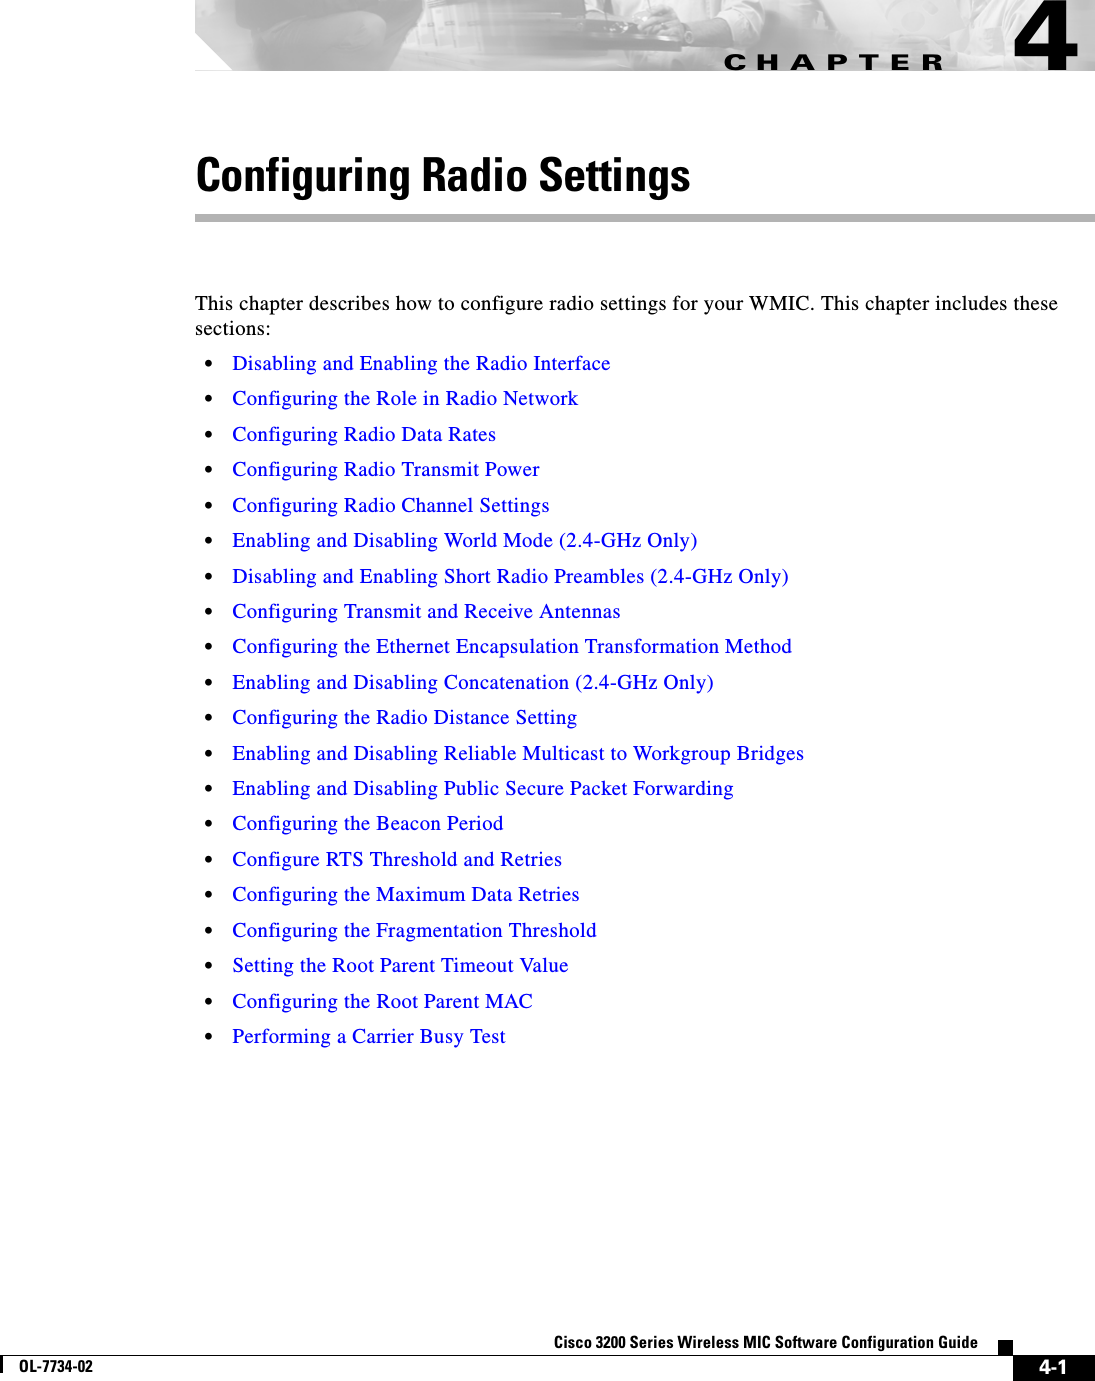 CHAPTER4-1Cisco 3200 Series Wireless MIC Software Configuration GuideOL-7734-024Configuring Radio SettingsThis chapter describes how to configure radio settings for your WMIC. This chapter includes these sections:•Disabling and Enabling the Radio Interface•Configuring the Role in Radio Network•Configuring Radio Data Rates•Configuring Radio Transmit Power•Configuring Radio Channel Settings•Enabling and Disabling World Mode (2.4-GHz Only)•Disabling and Enabling Short Radio Preambles (2.4-GHz Only)•Configuring Transmit and Receive Antennas•Configuring the Ethernet Encapsulation Transformation Method•Enabling and Disabling Concatenation (2.4-GHz Only)•Configuring the Radio Distance Setting•Enabling and Disabling Reliable Multicast to Workgroup Bridges•Enabling and Disabling Public Secure Packet Forwarding•Configuring the Beacon Period•Configure RTS Threshold and Retries•Configuring the Maximum Data Retries•Configuring the Fragmentation Threshold•Setting the Root Parent Timeout Value•Configuring the Root Parent MAC•Performing a Carrier Busy Test